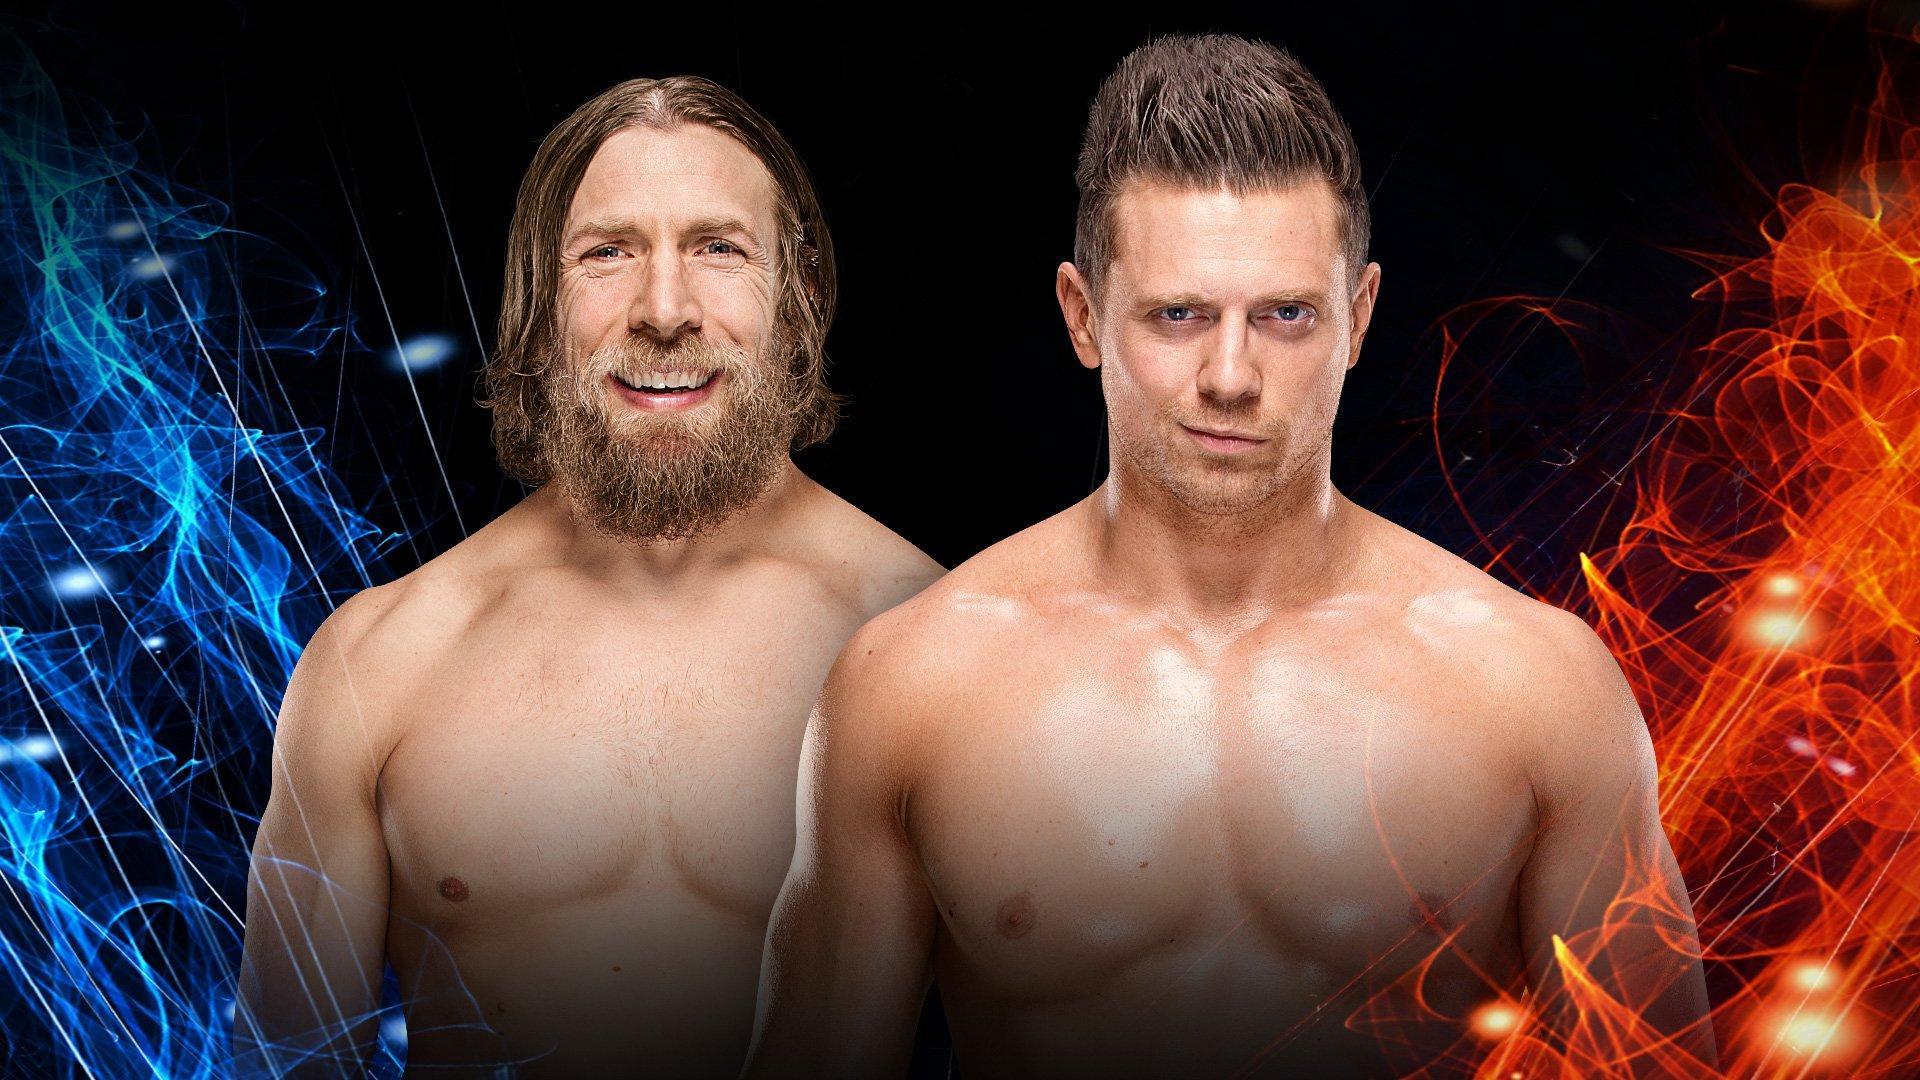 Three New Matches Announced For The WWE Super Show Down In Australia